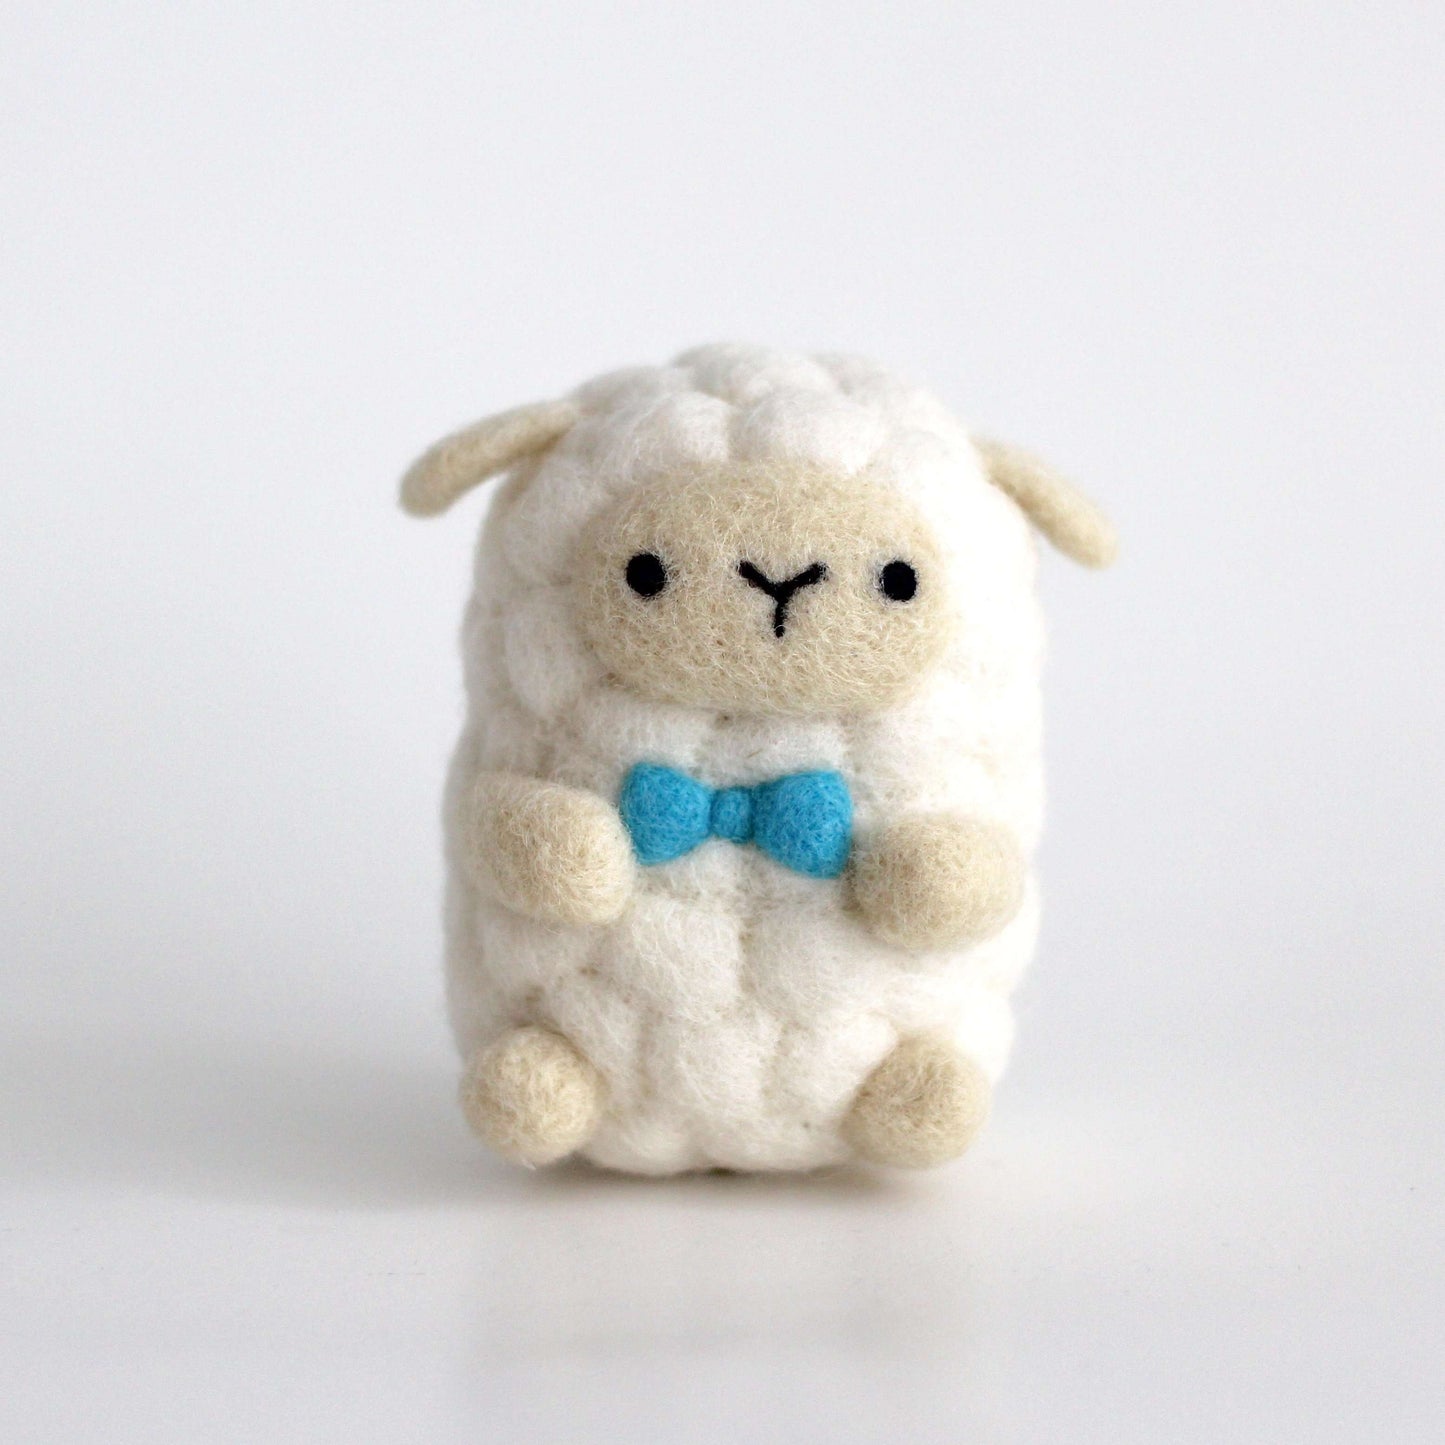 Needle Felted Sheep wearing Blue Bow Tie by Wild Whimsy Woolies